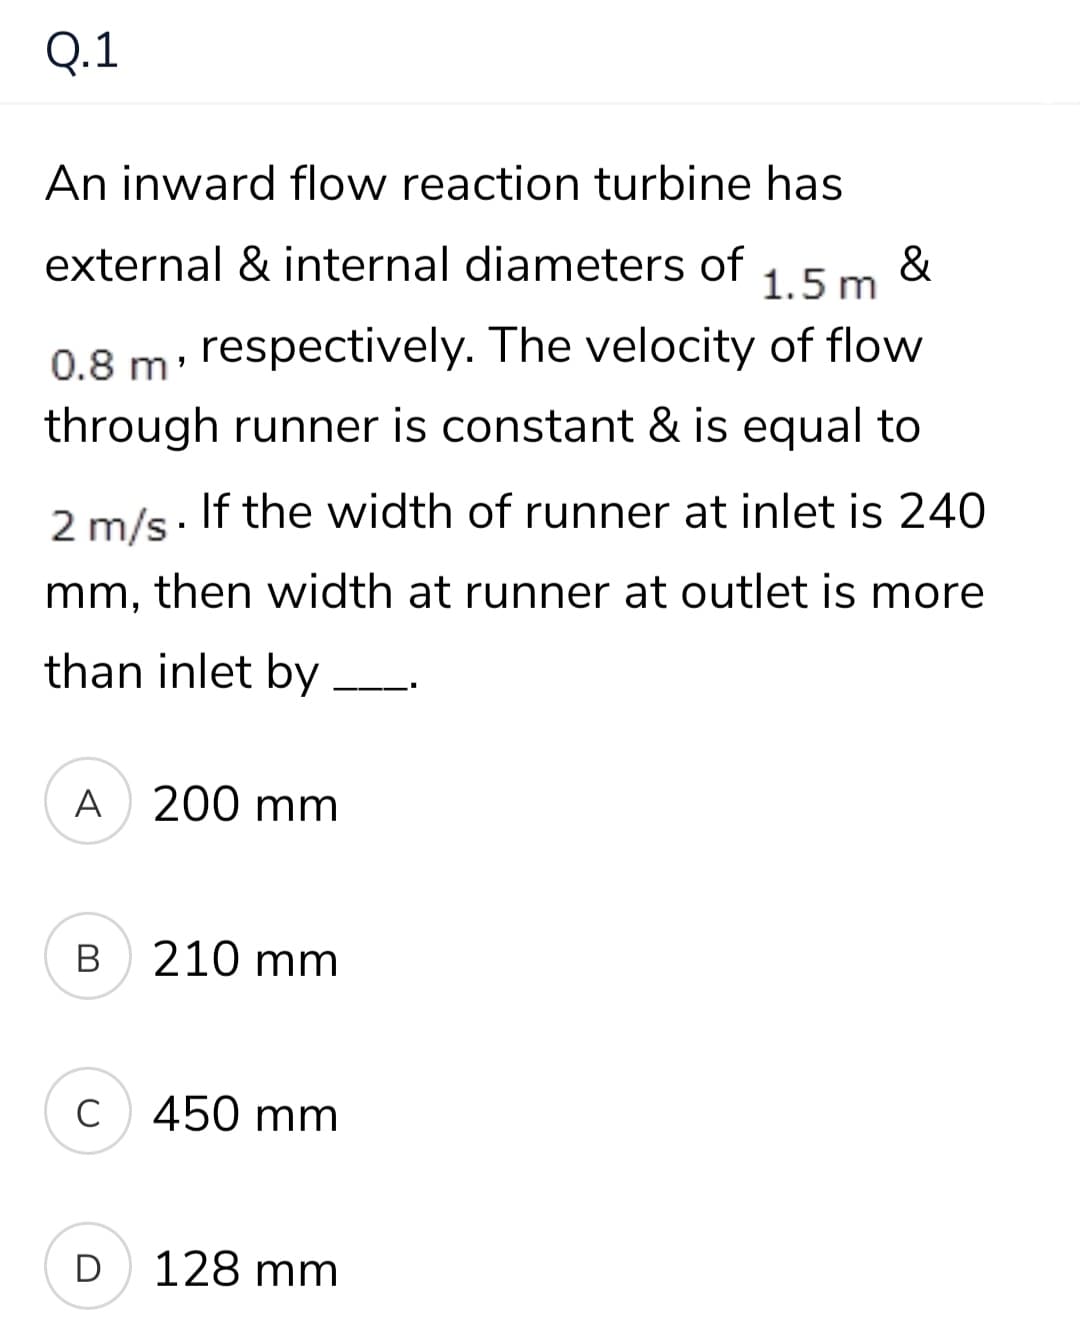 Q.1
An inward flow reaction turbine has
external & internal diameters of
&
1.5 m
0.8 m: respectively. The velocity of flow
through runner is constant & is equal to
2 m/s. If the width of runner at inlet is 240
mm, then width at runner at outlet is more
than inlet by
A 200 mm
В
210 mm
C
450 mm
D
128 mm
